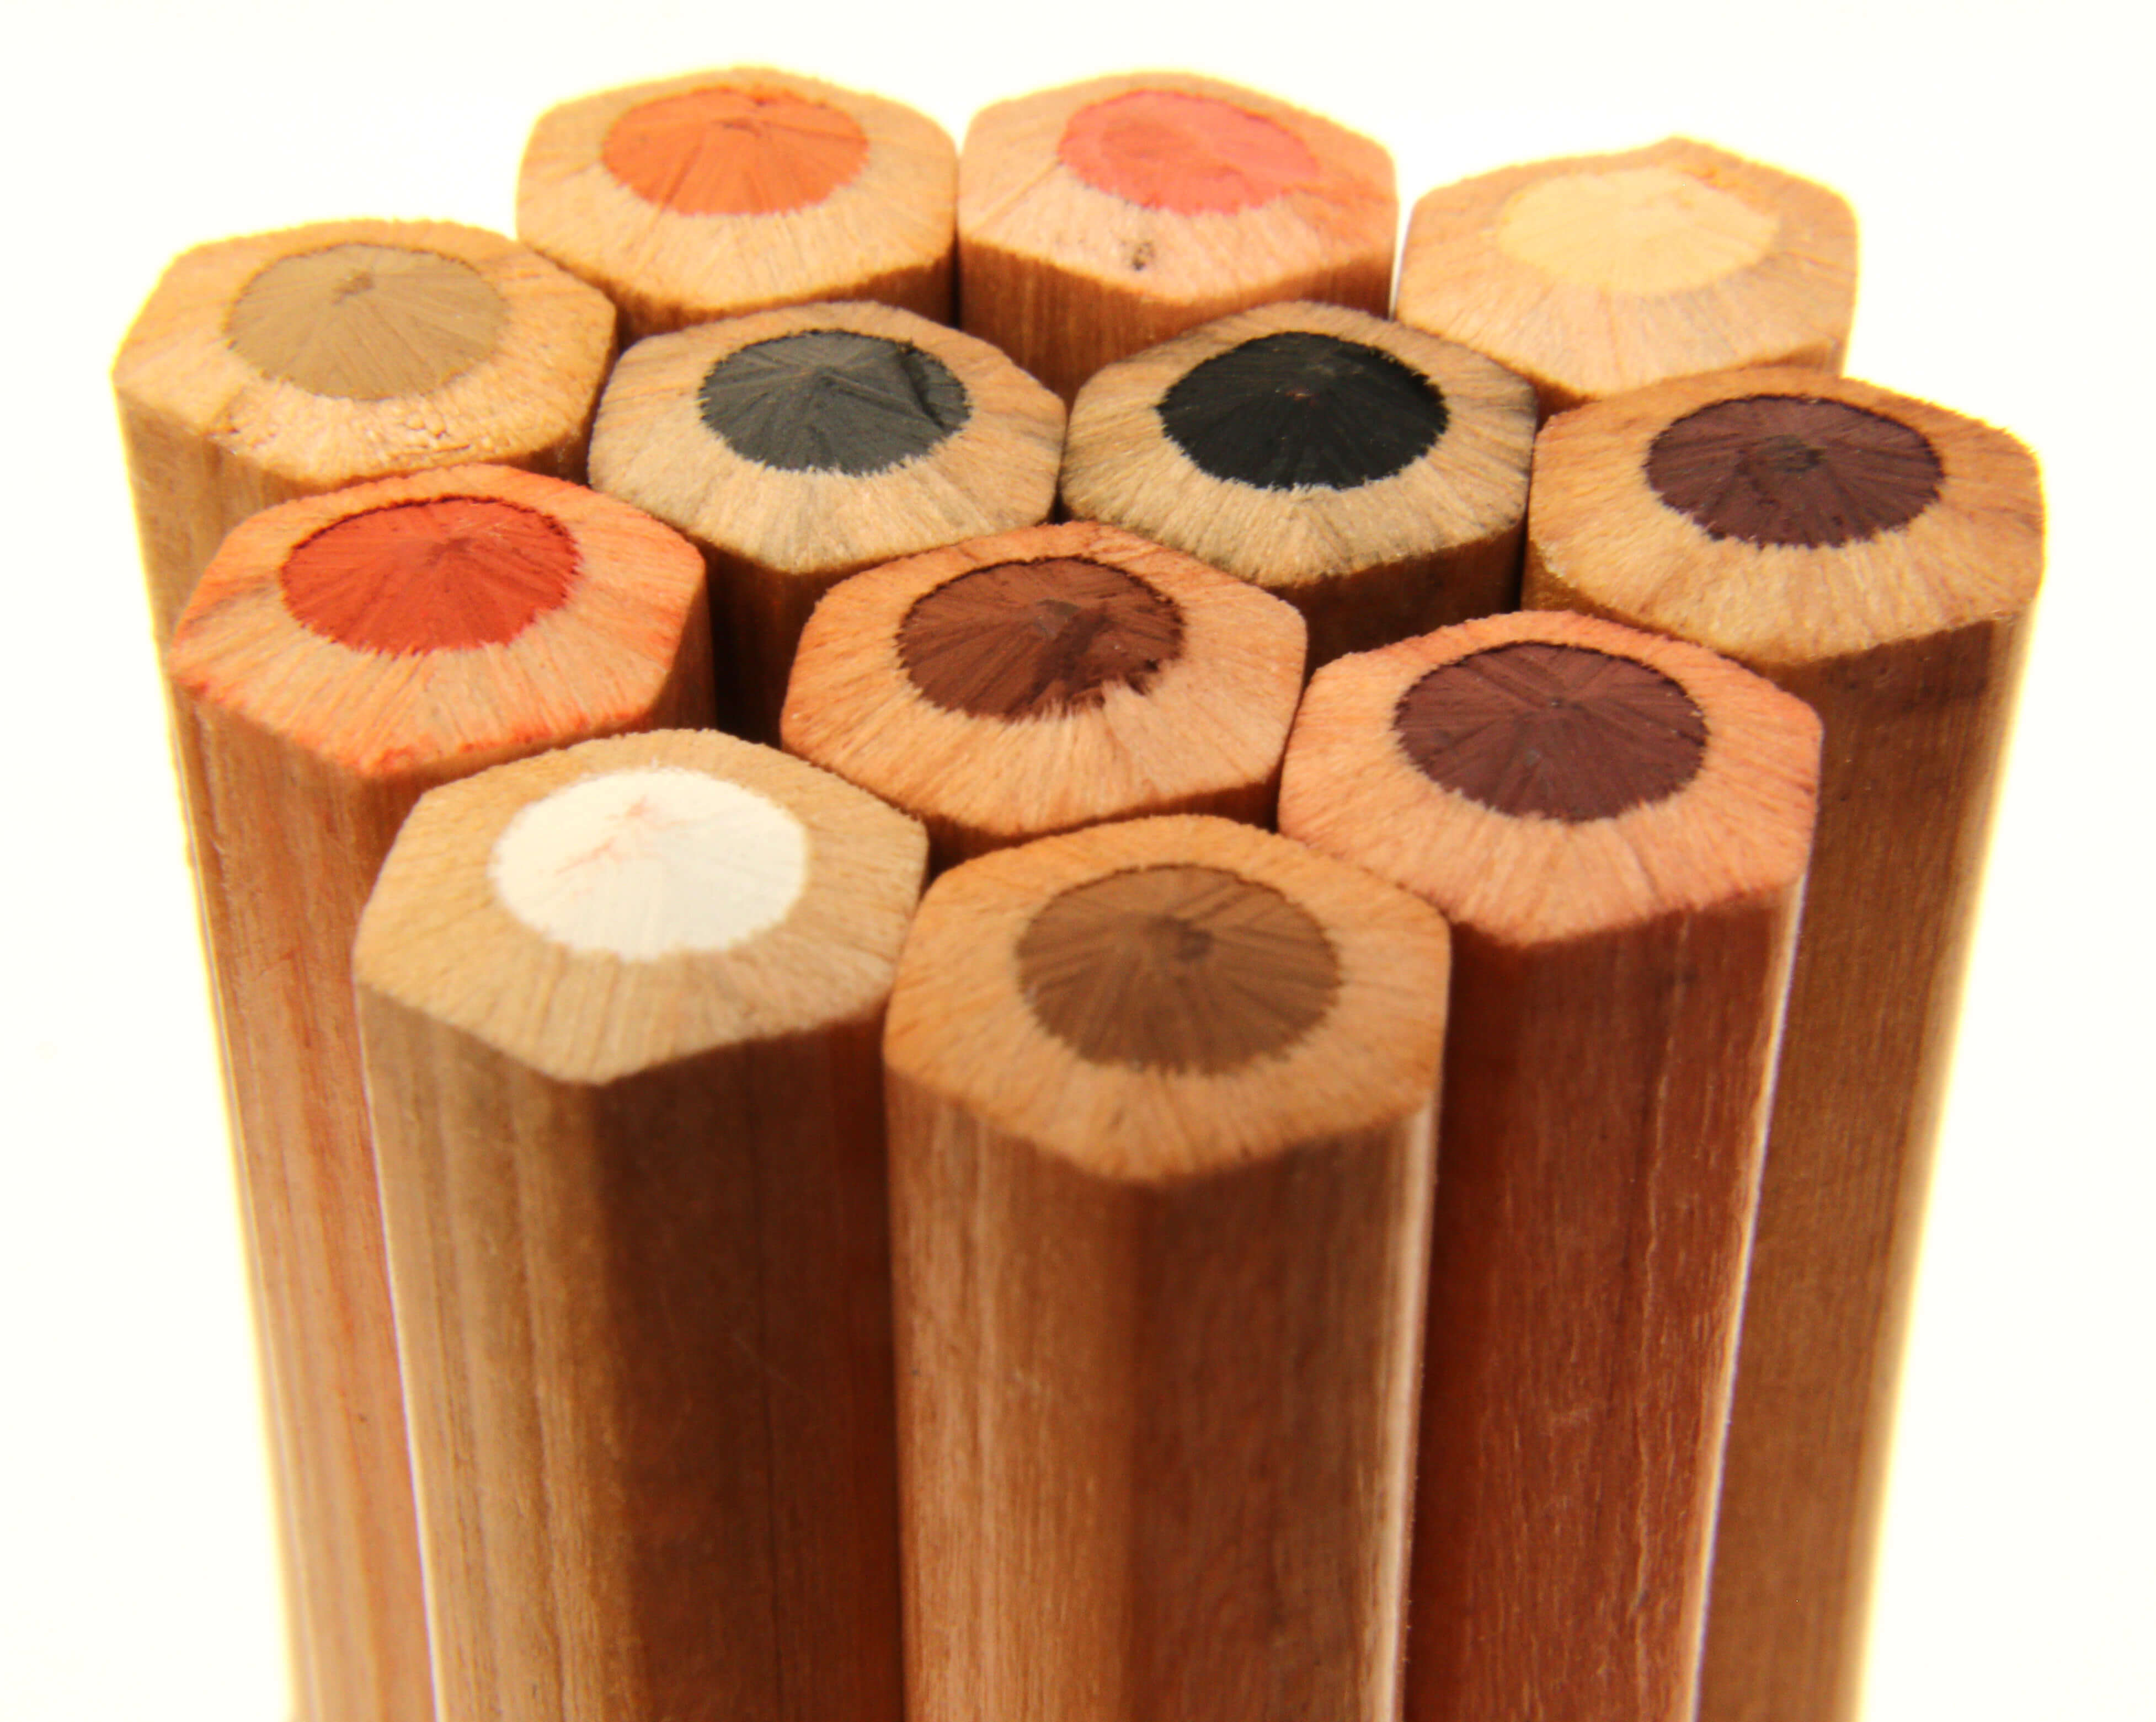 Pastel pencils with the leads pointing upwards to show the coloured lead strips inside the pencil's wooden case.